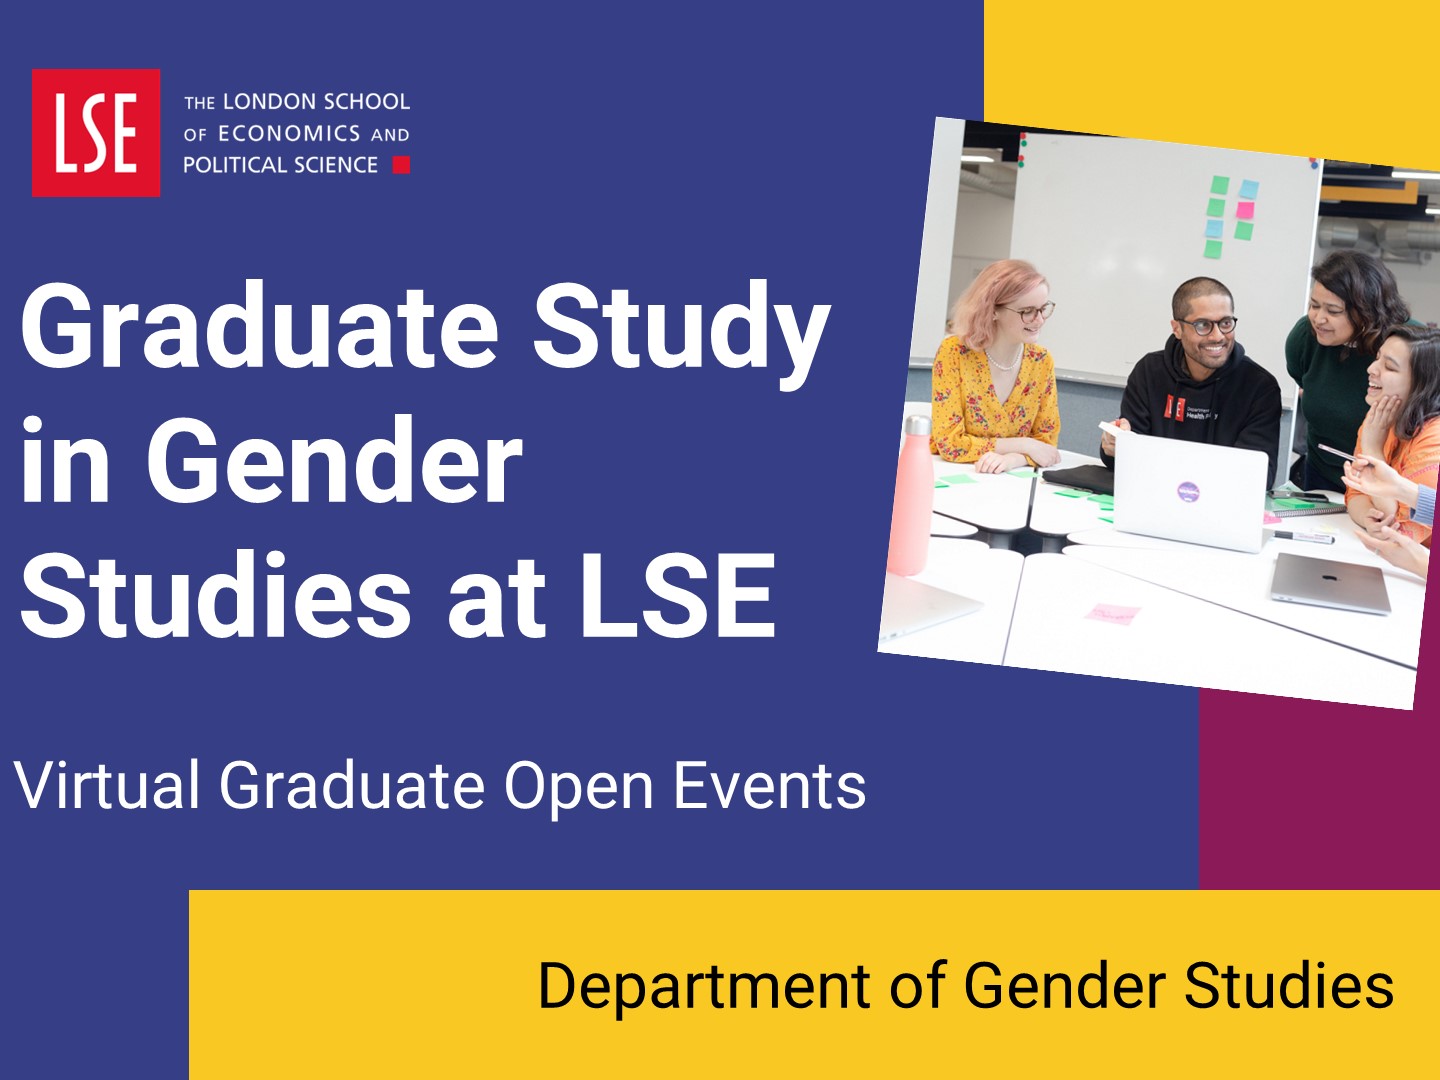 An introduction to graduate study in Gender Studies at LSE